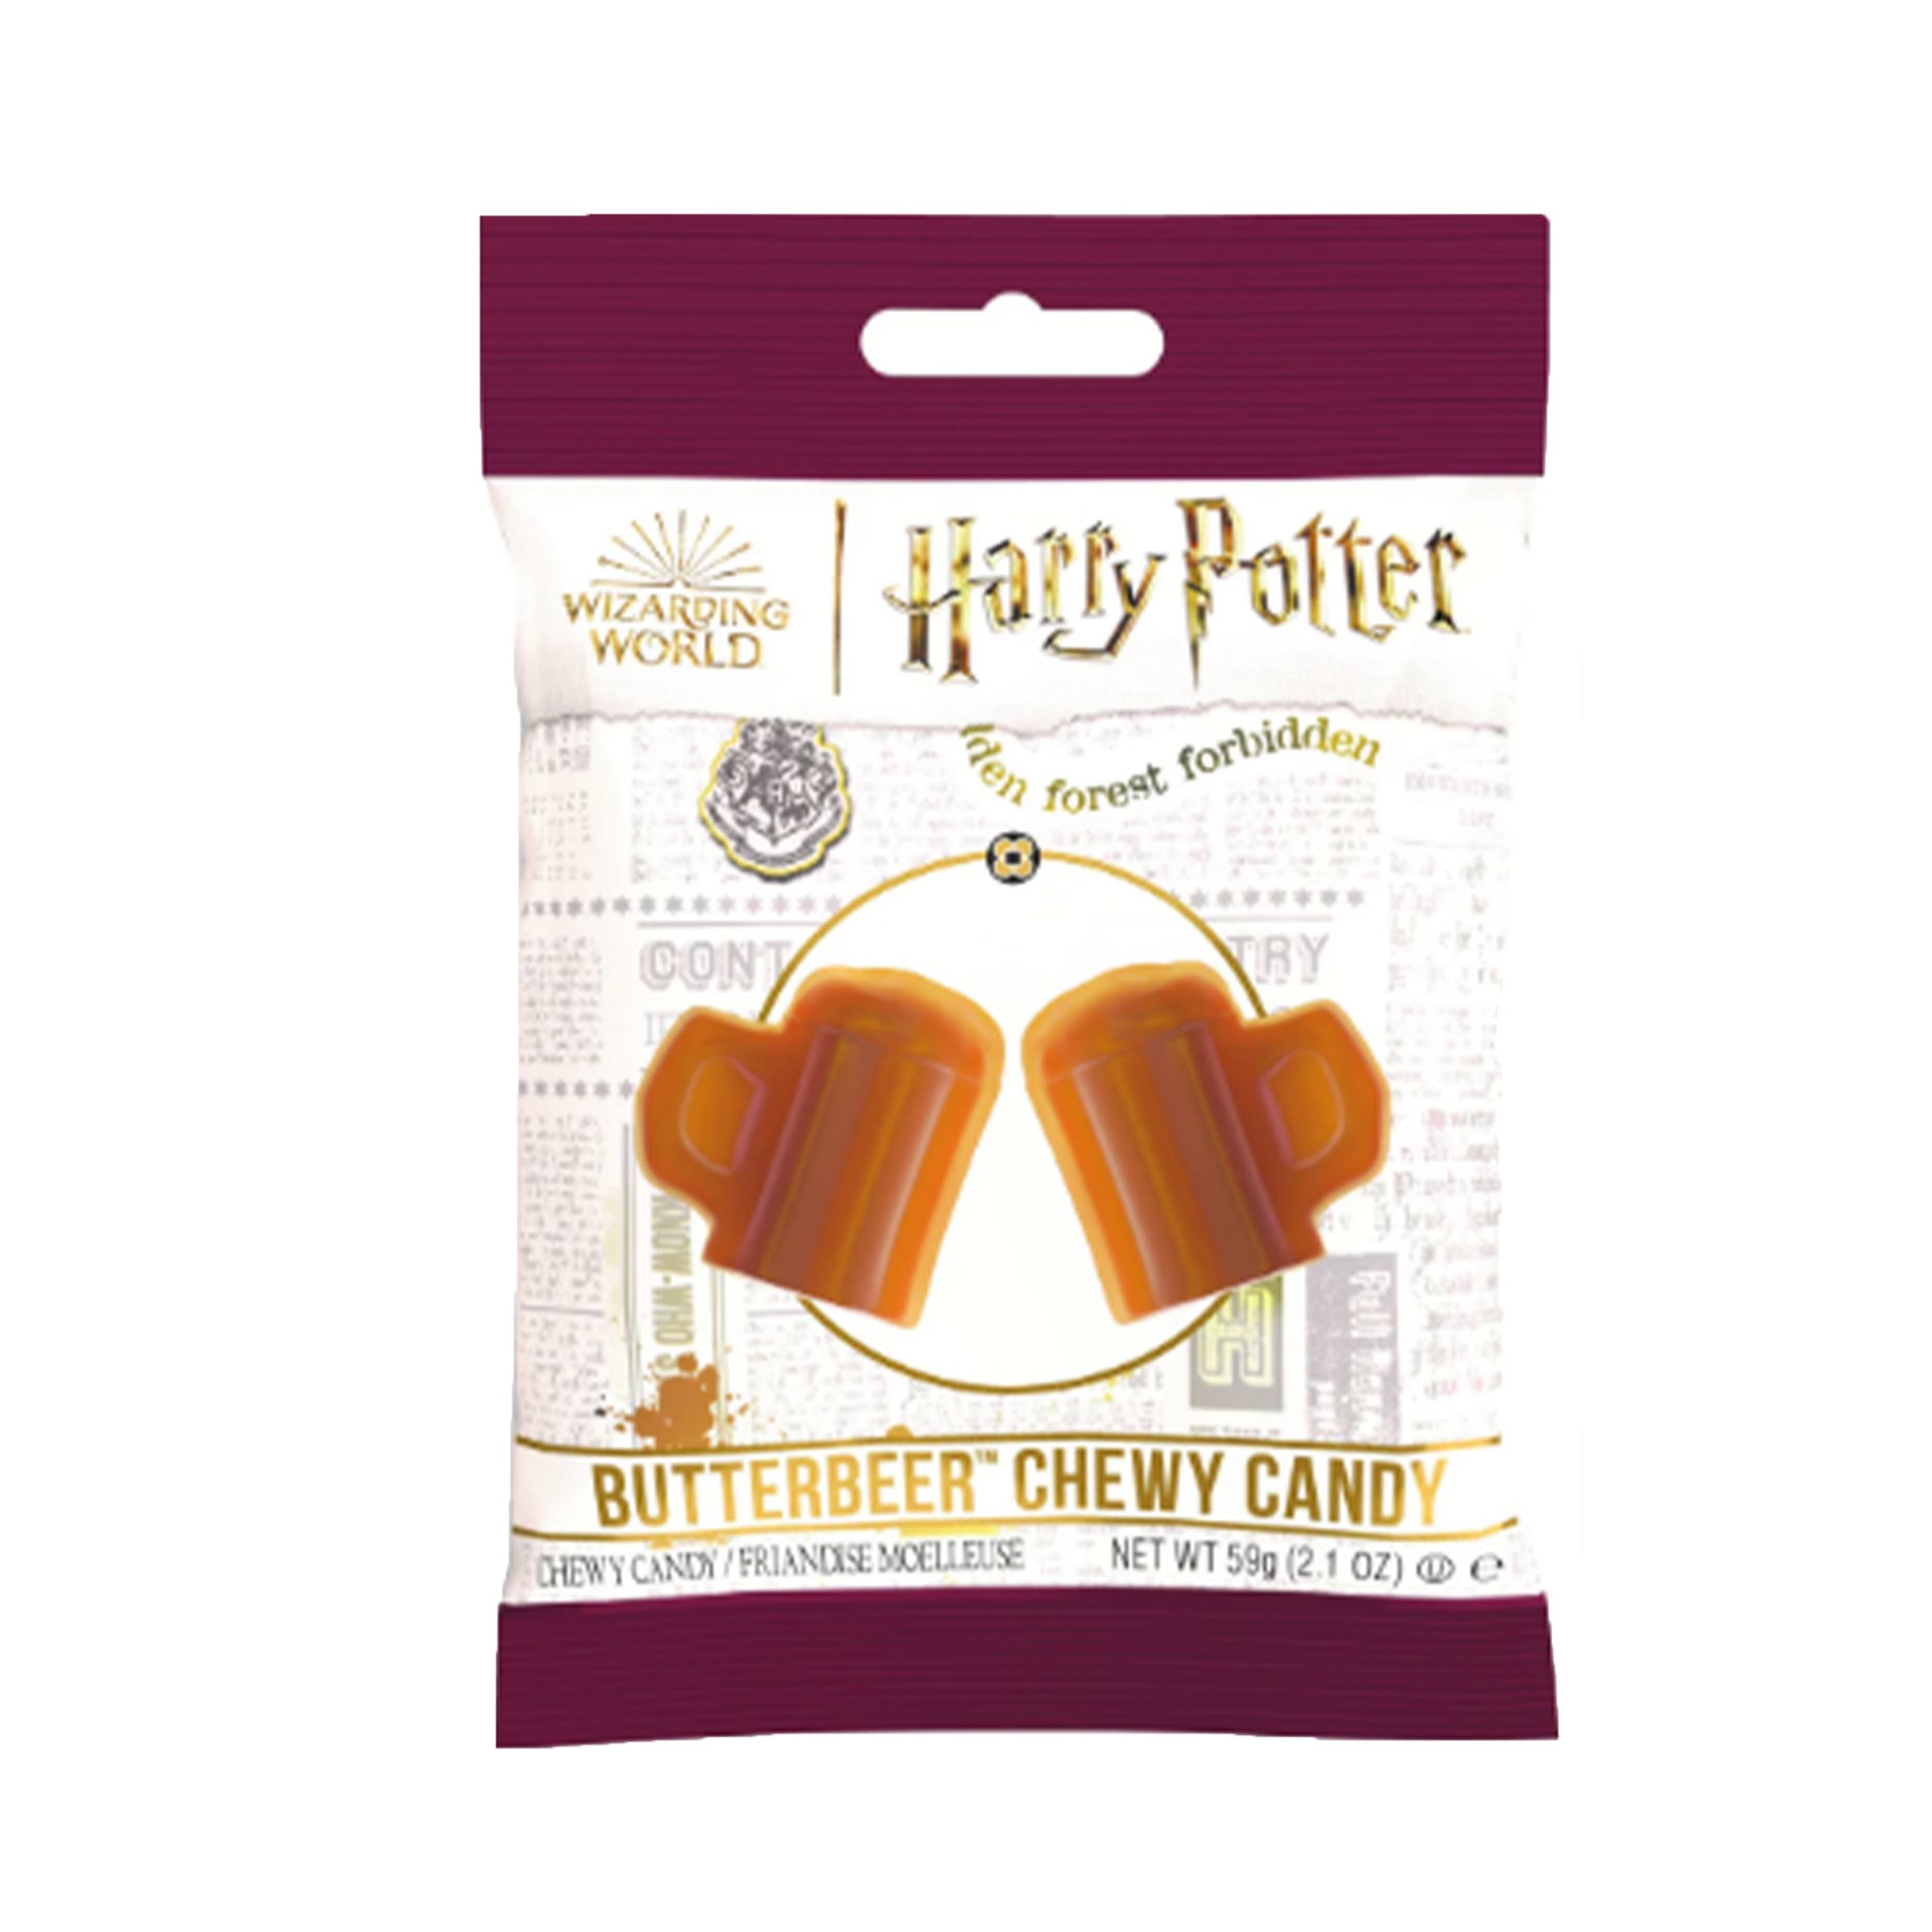 Harry Potter Butterbeer Chewy Candy 59g